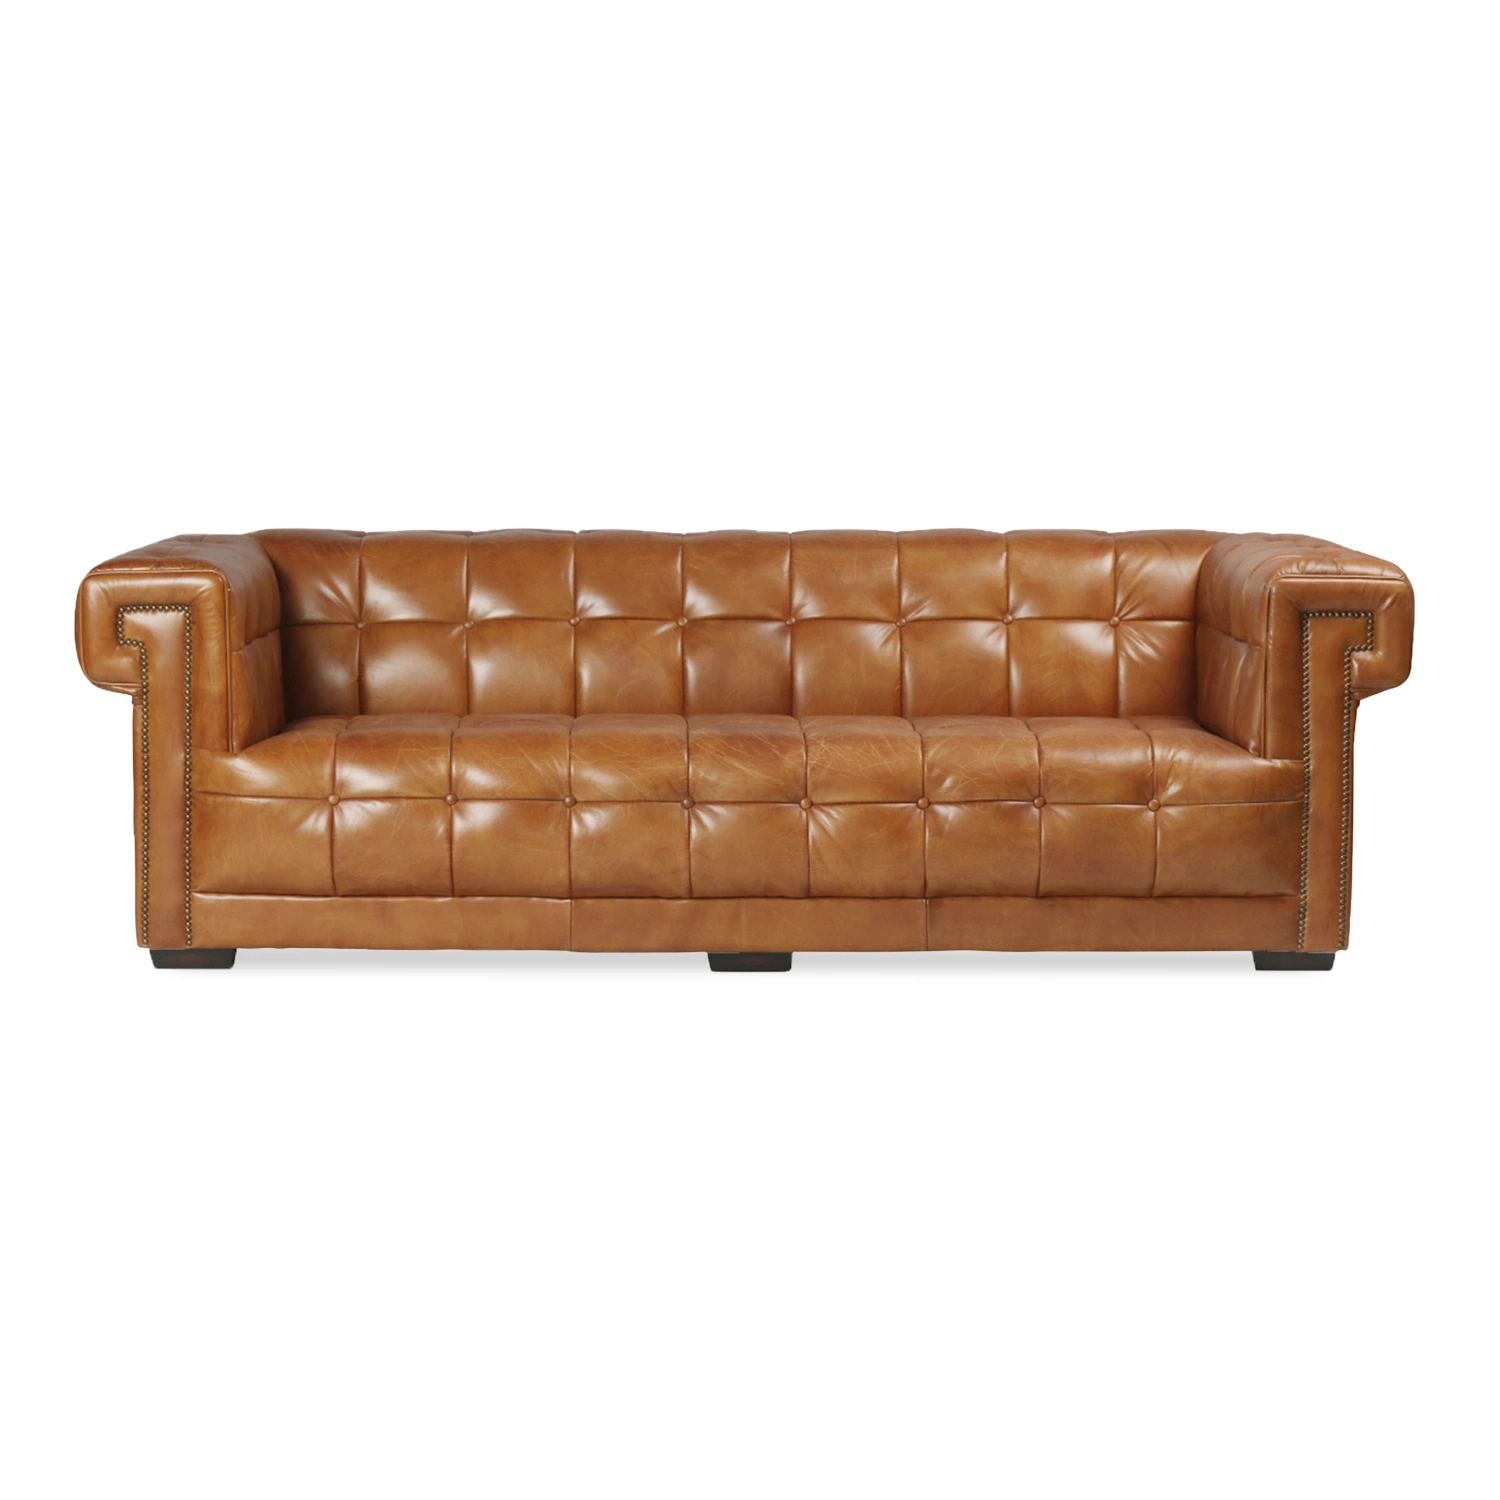 Vintage Hotel Luxury Living Room Furniture Home Office Antique Tufted Genuine Leather Chesterfield Sofa